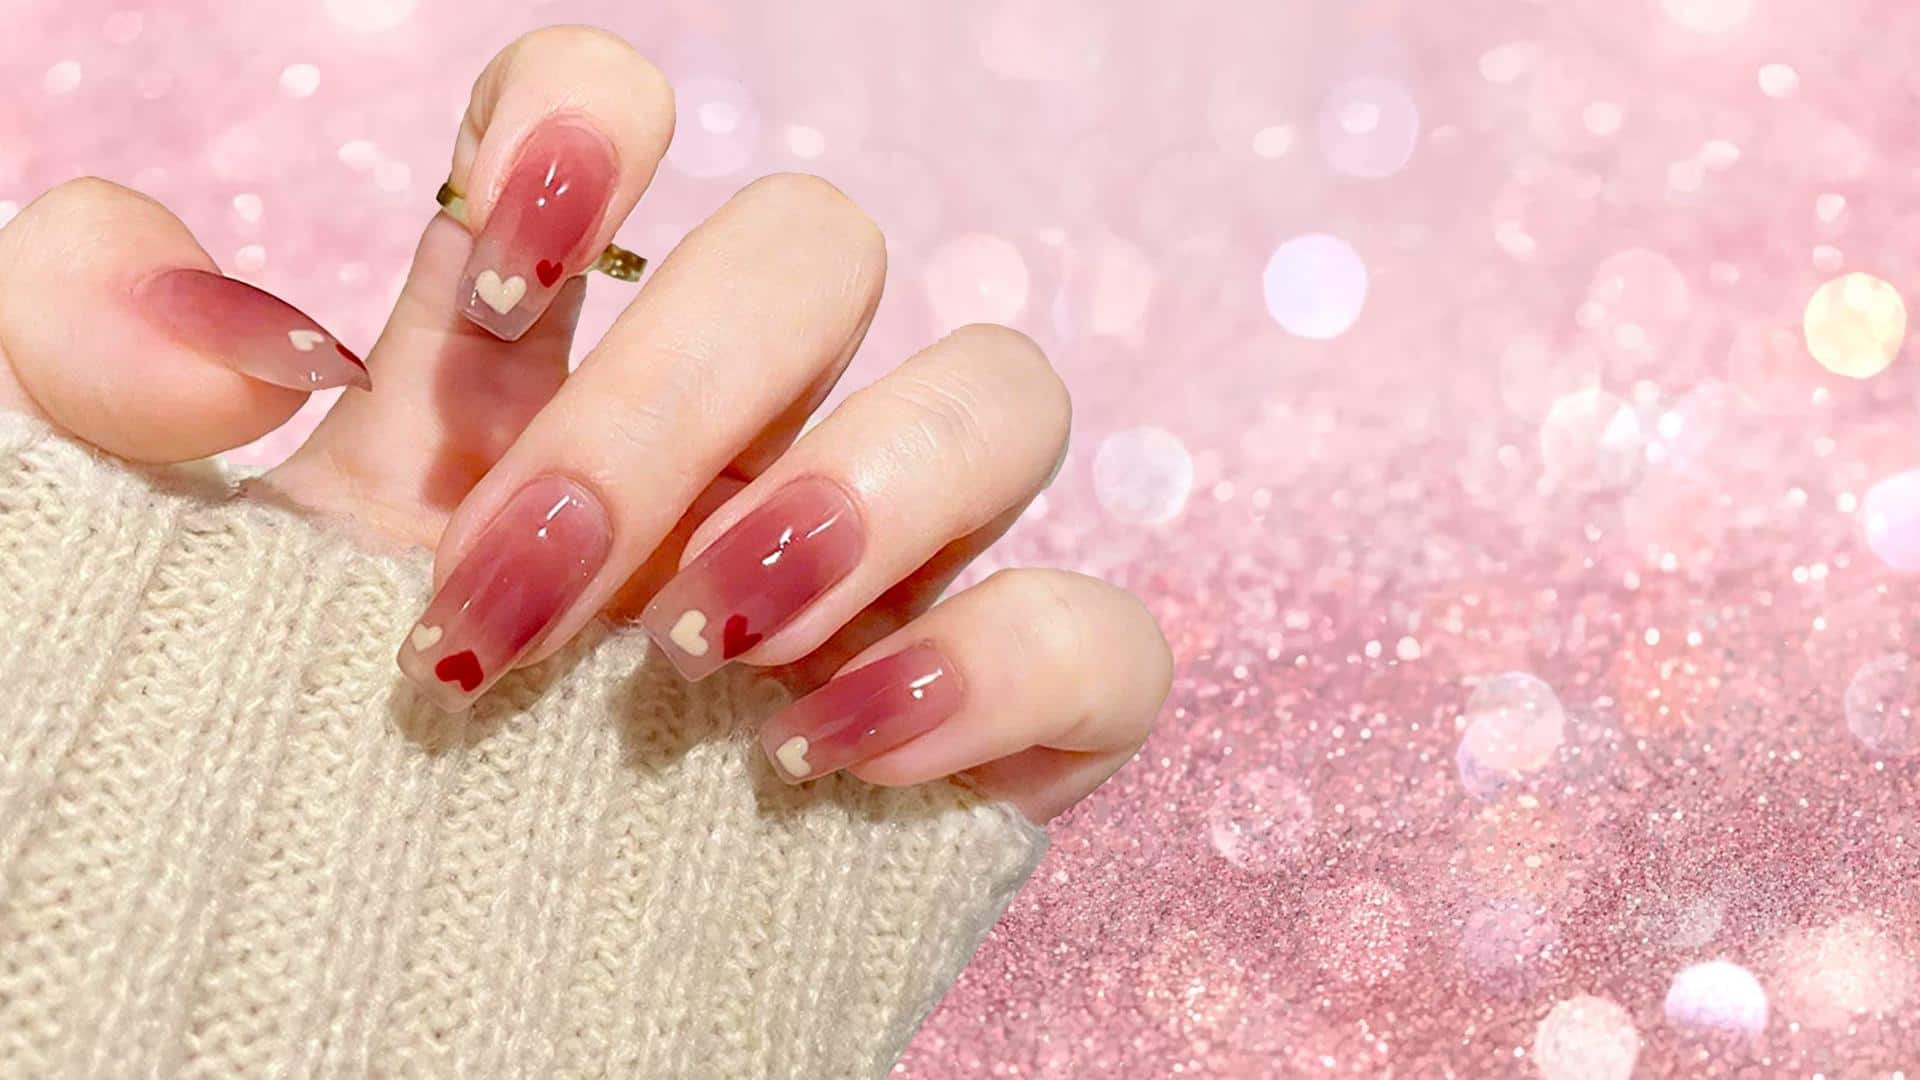 Manicure Tuesday - Sparkly New Years Nails | See the World in PINK